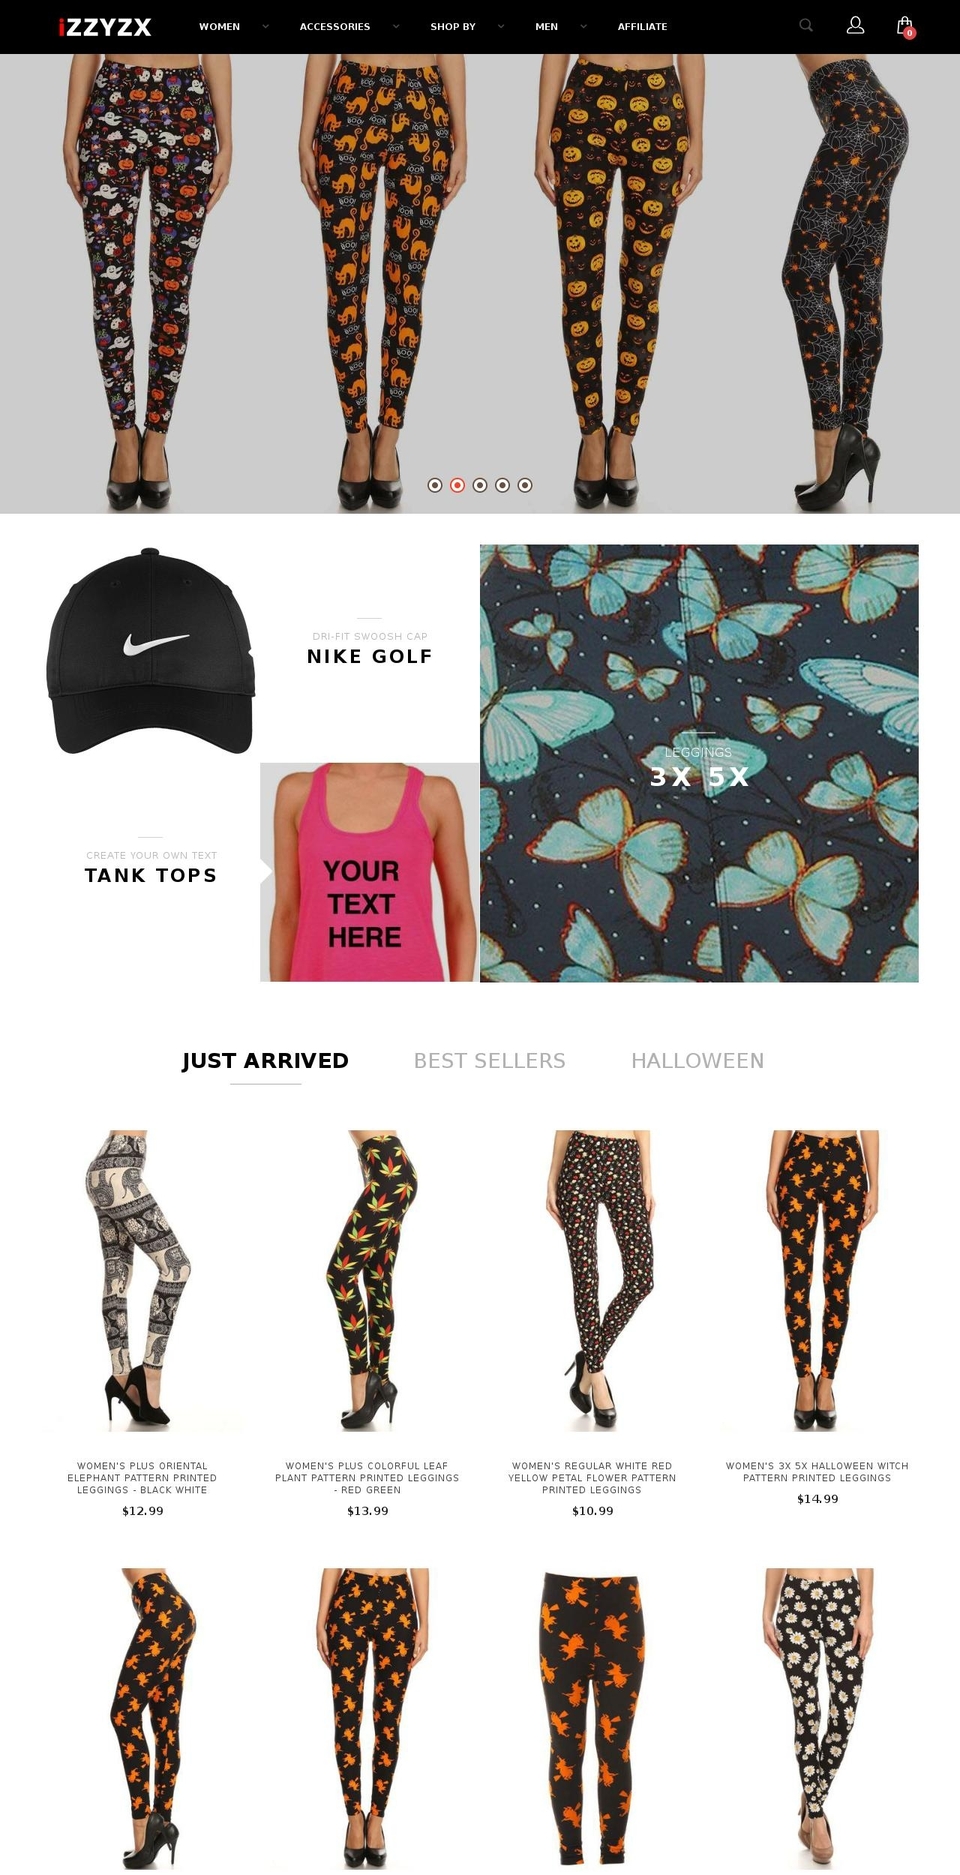 belle Shopify theme site example leggings.fit